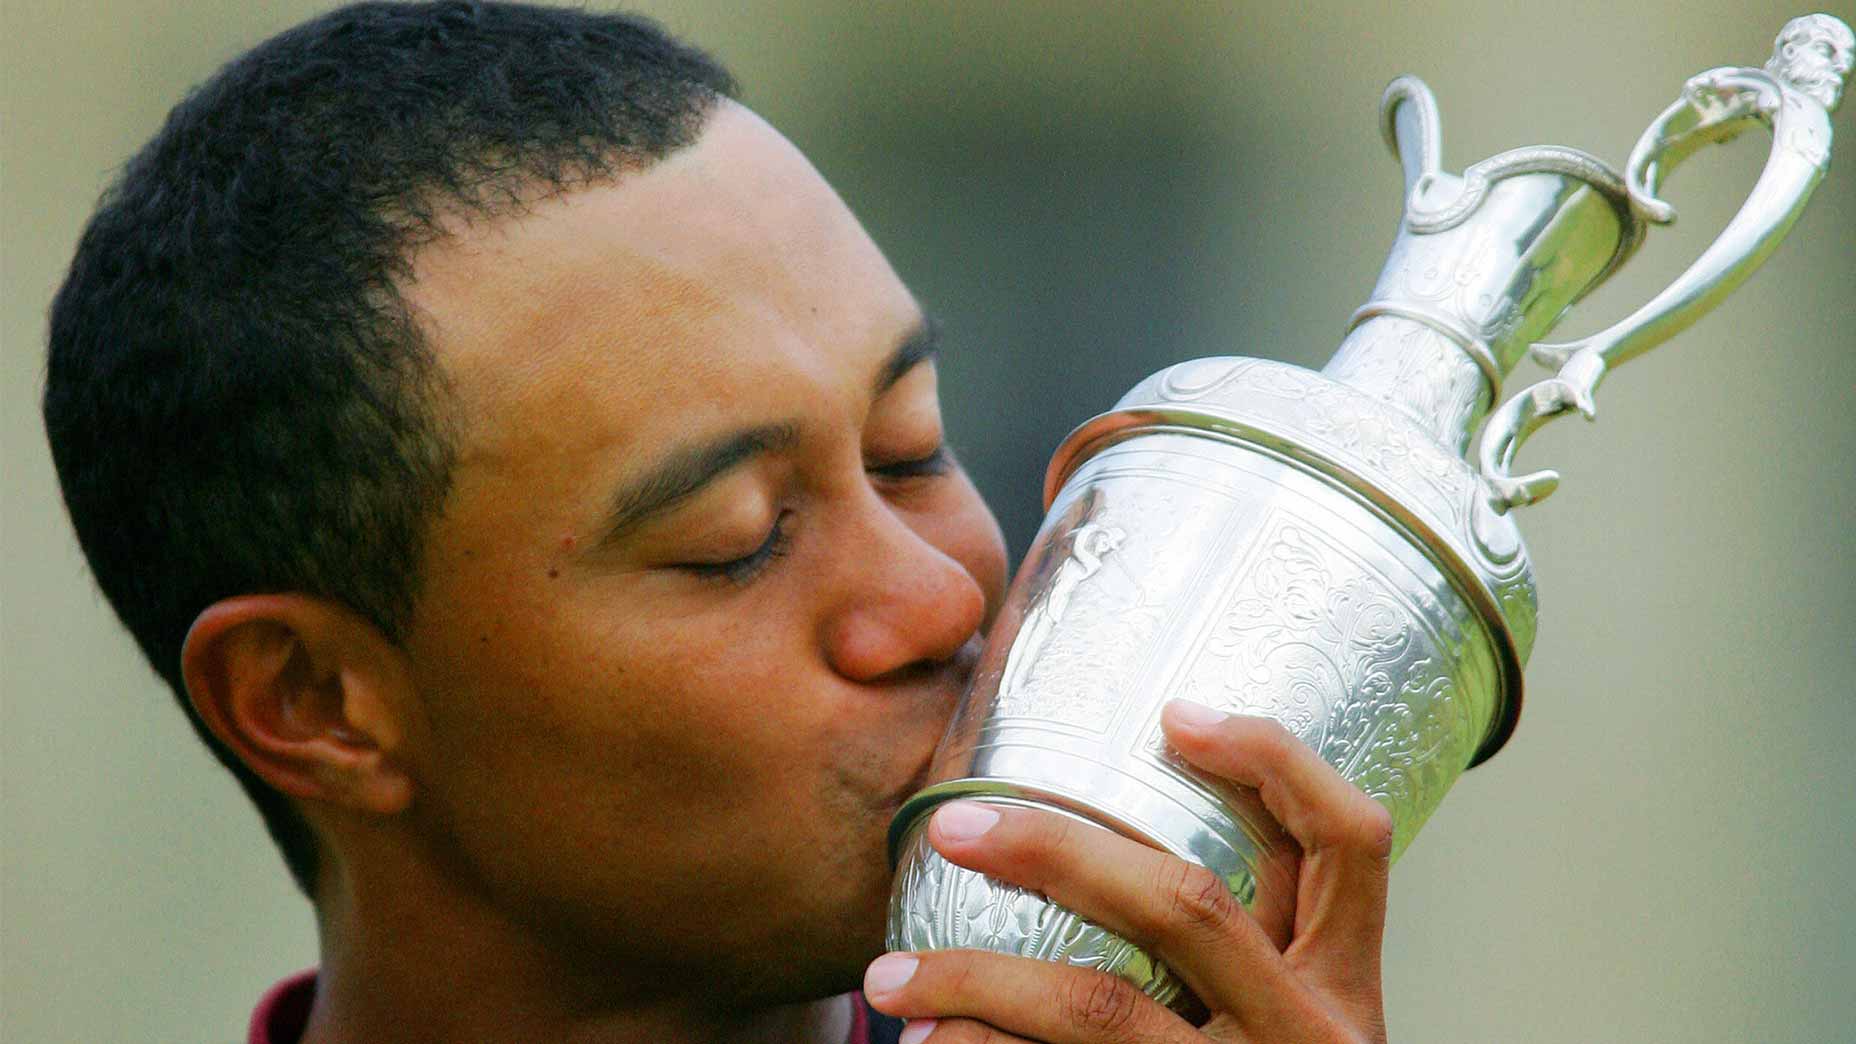 QUIZ: Test your knowledge of the winners of The Open Championship